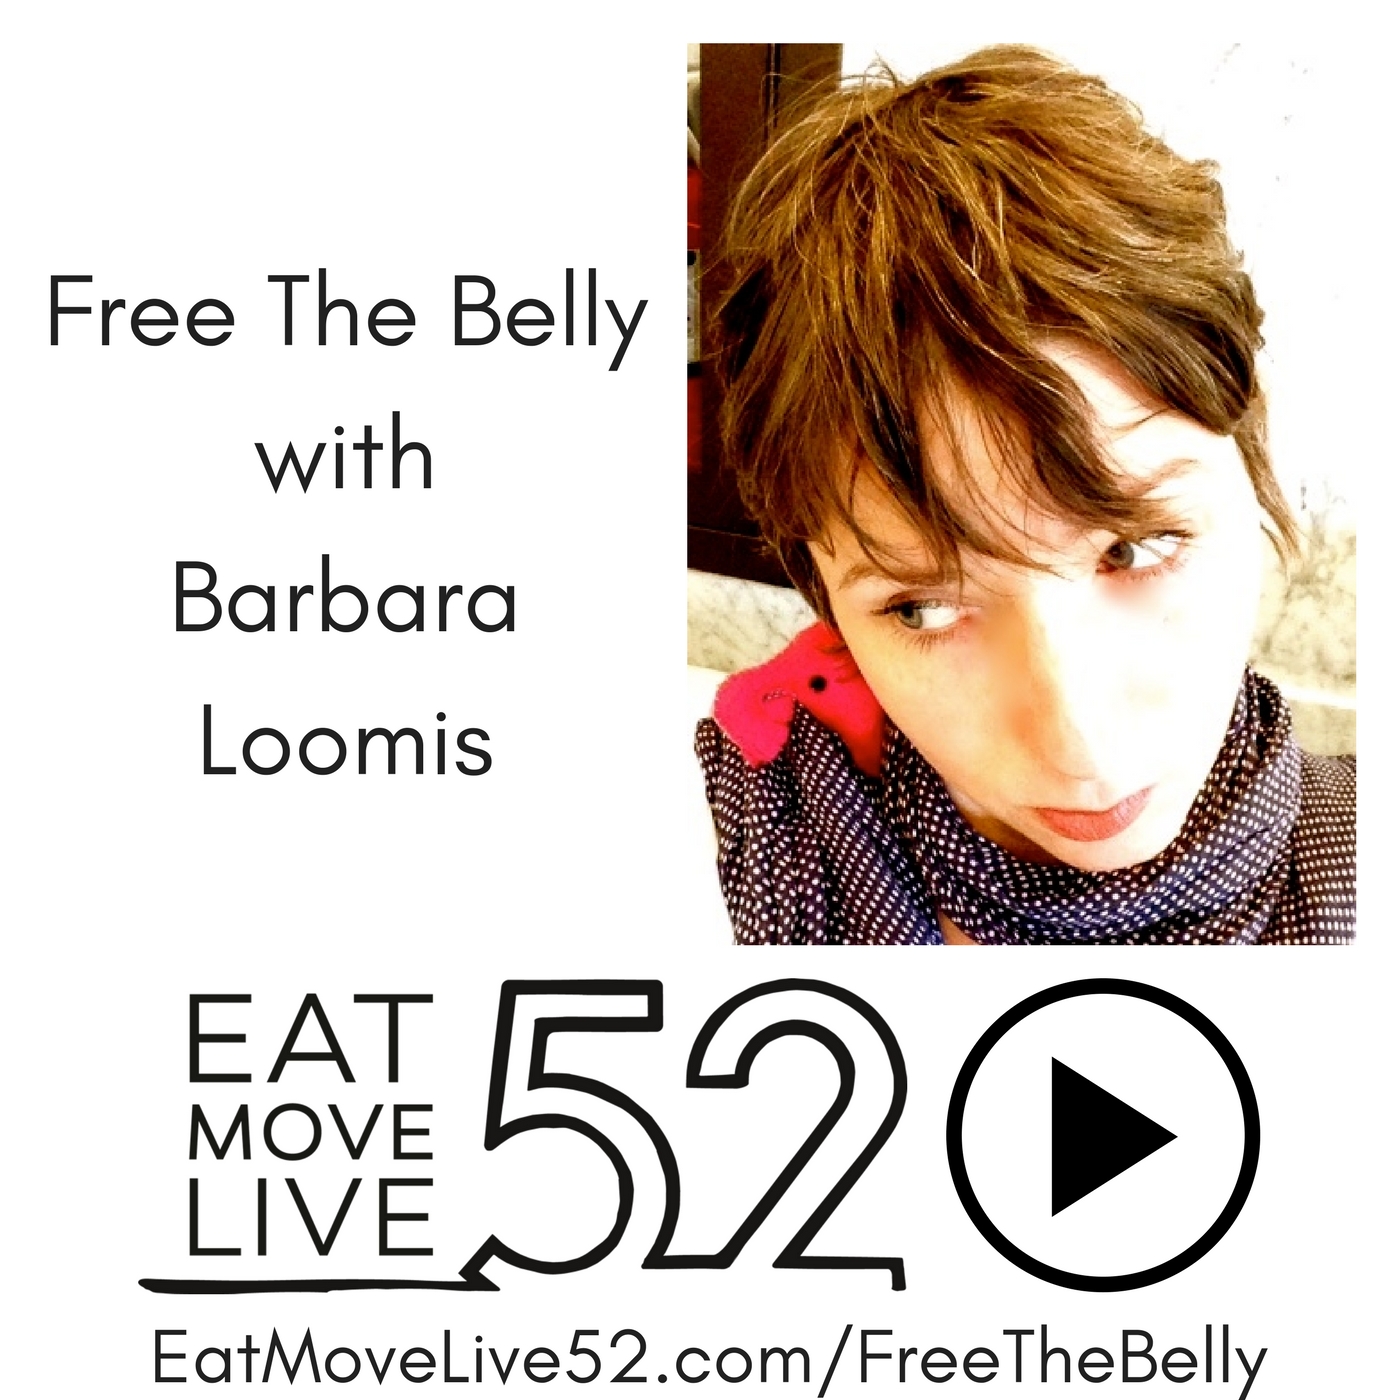 Free The Belly with Barbara Loomis